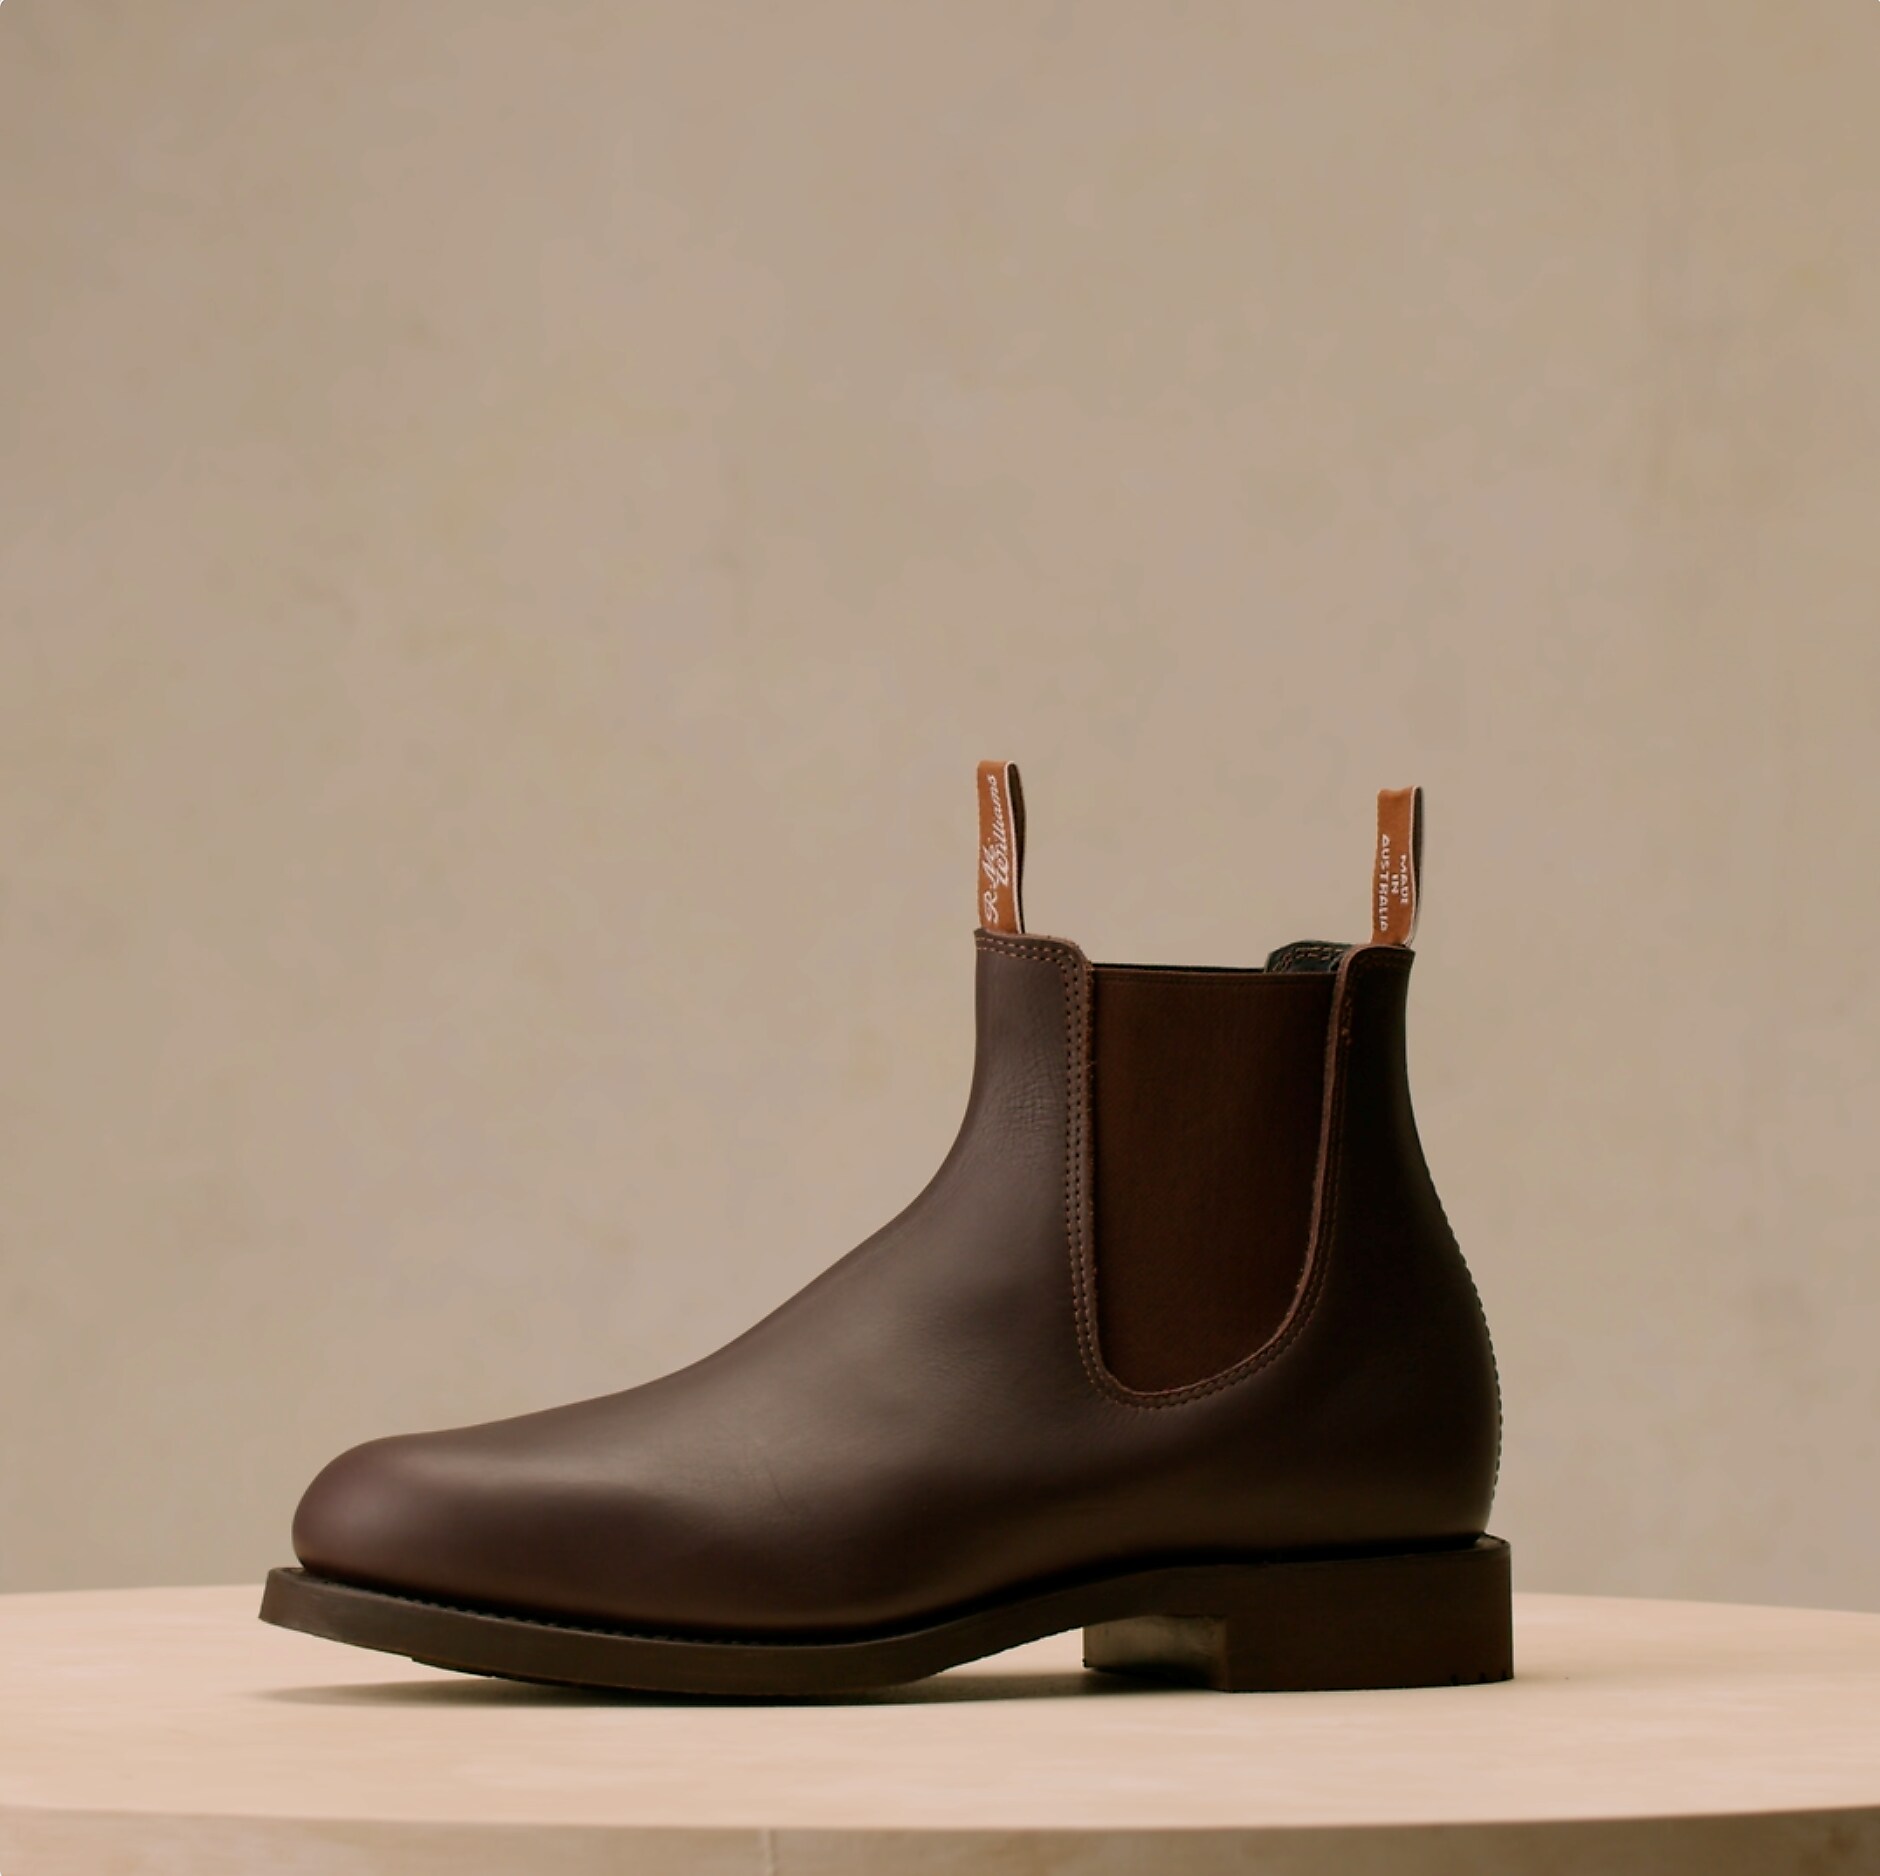 Brown Gardener Boots, R.M.Williams Chelsea Boots